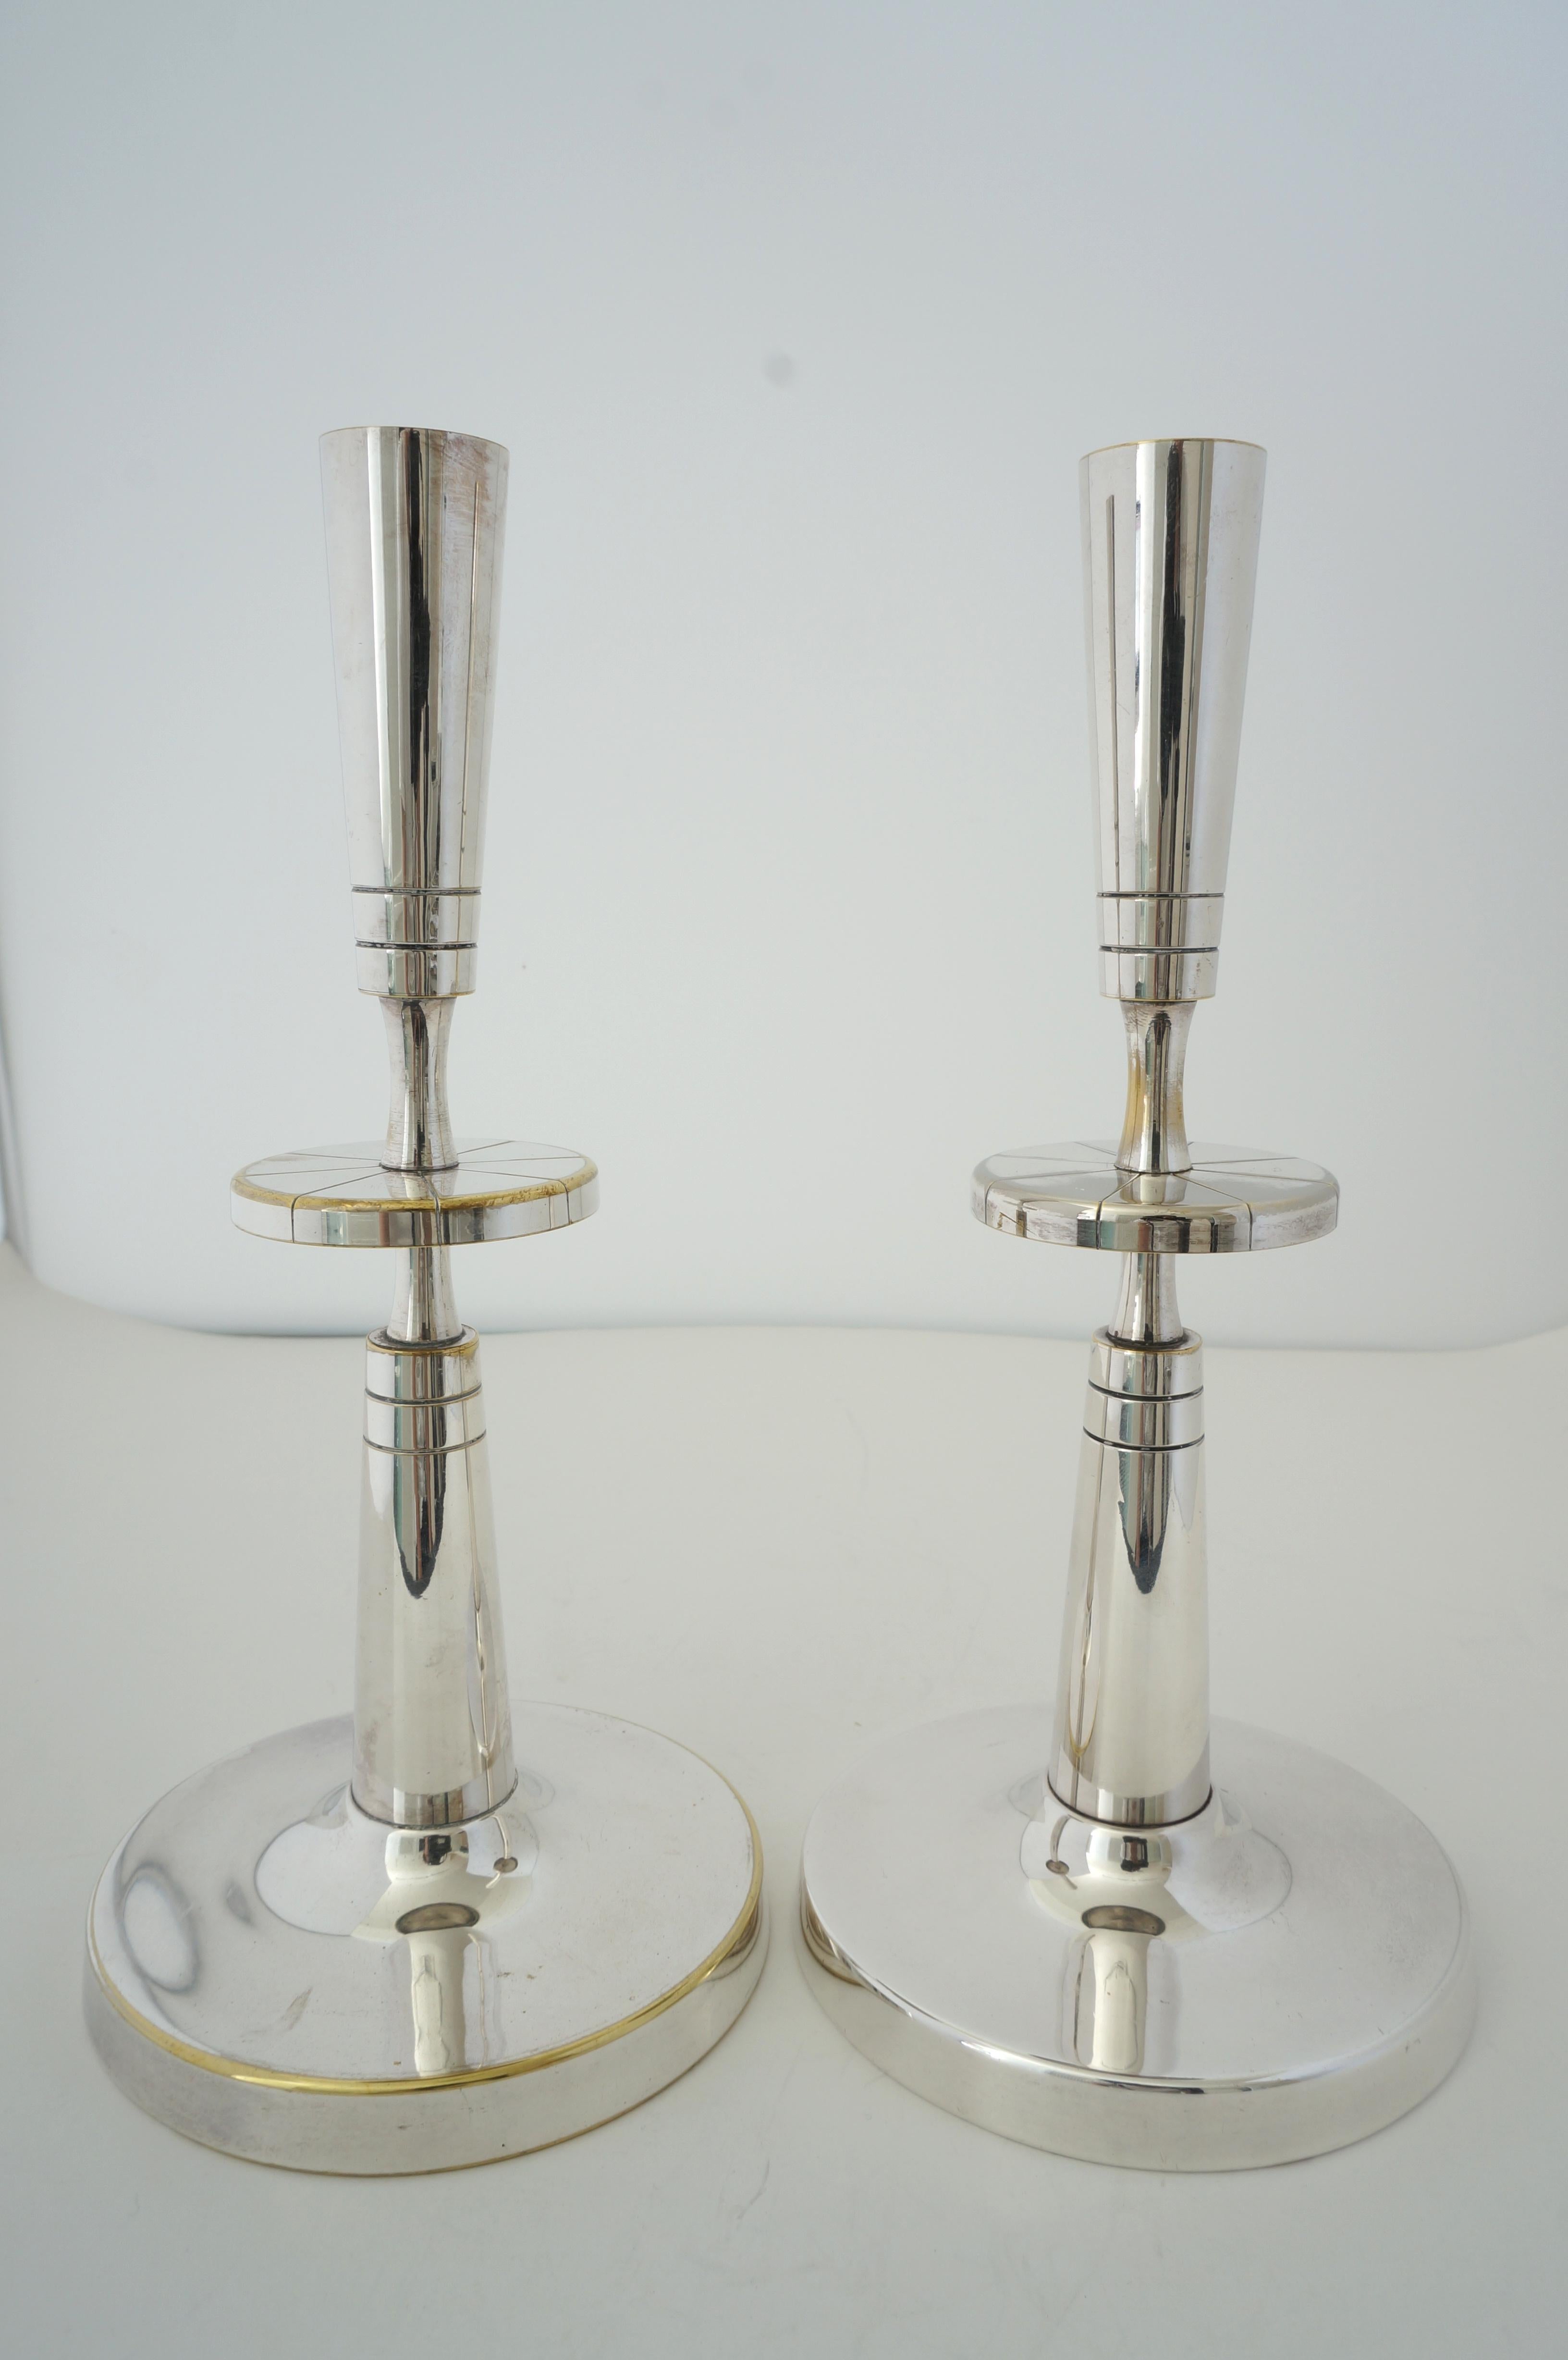 American Pair of Silverplate Candlesticks by Tommi Parzinger for Mueck-Cary